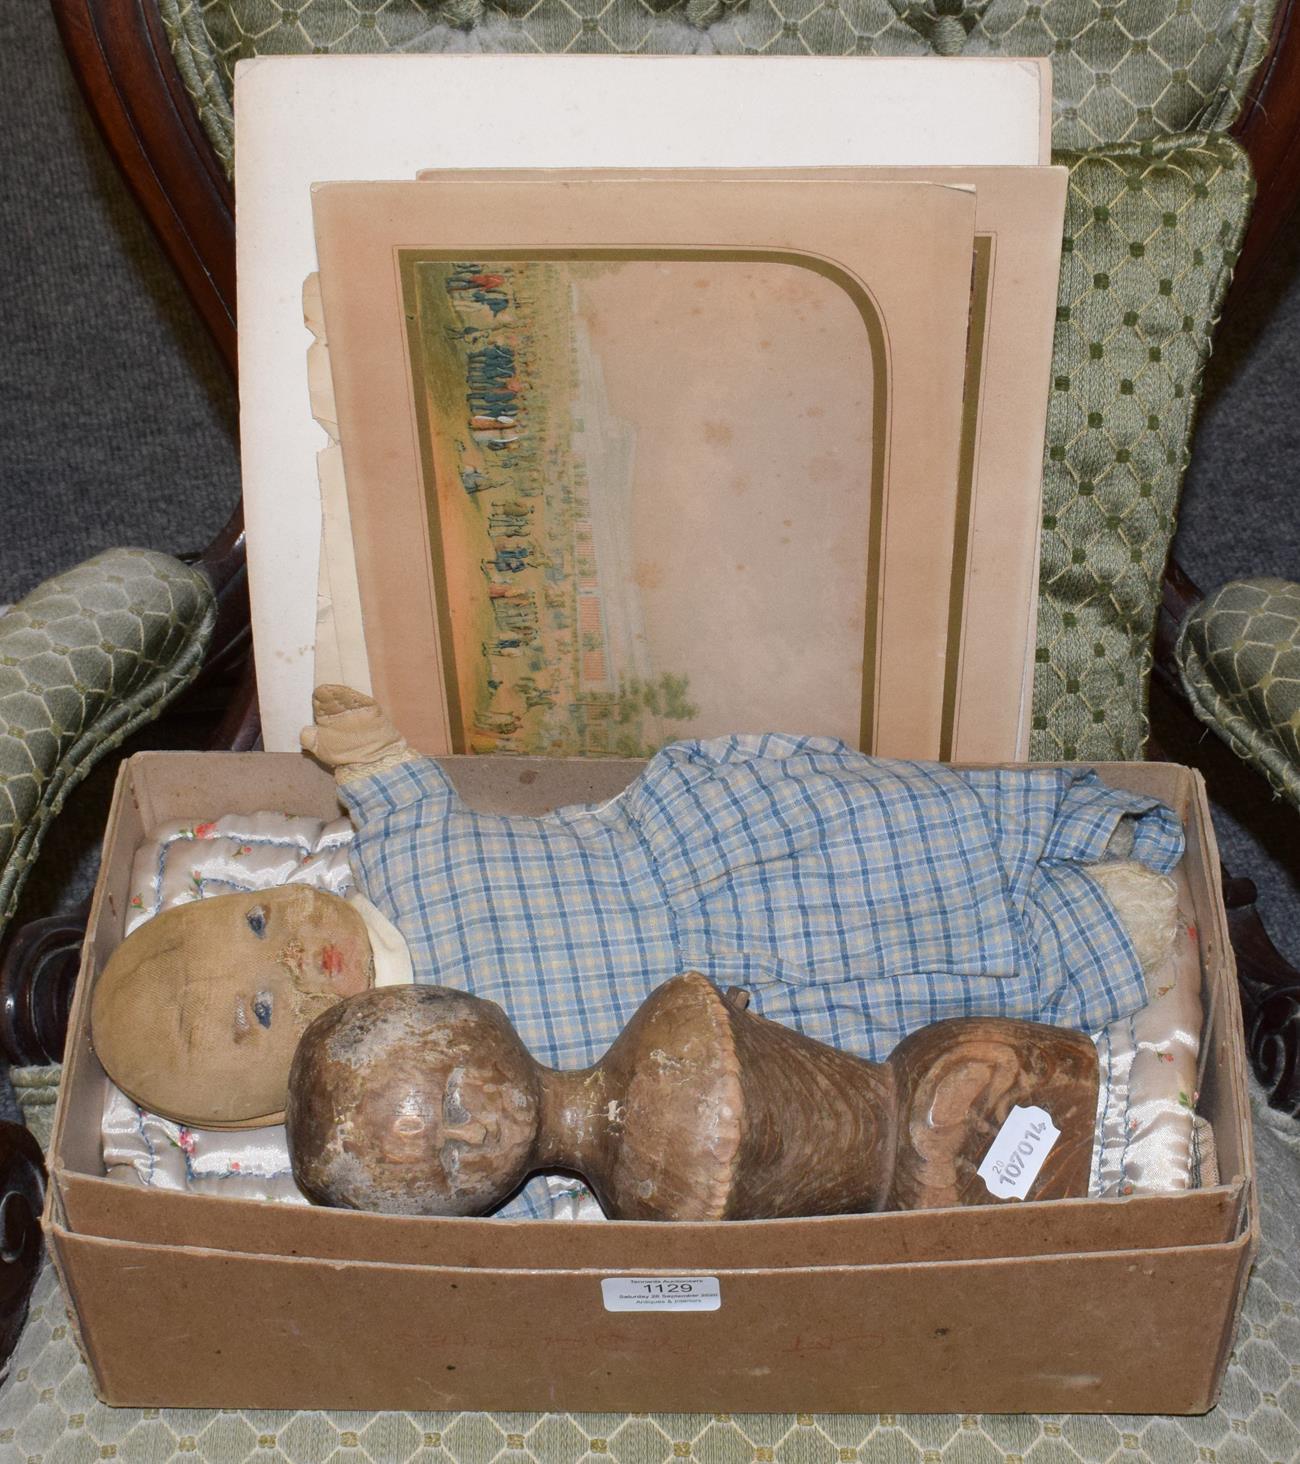 A wooden antique doll head and torso, 26.5cm high and a fabric doll in box together with Le Blond